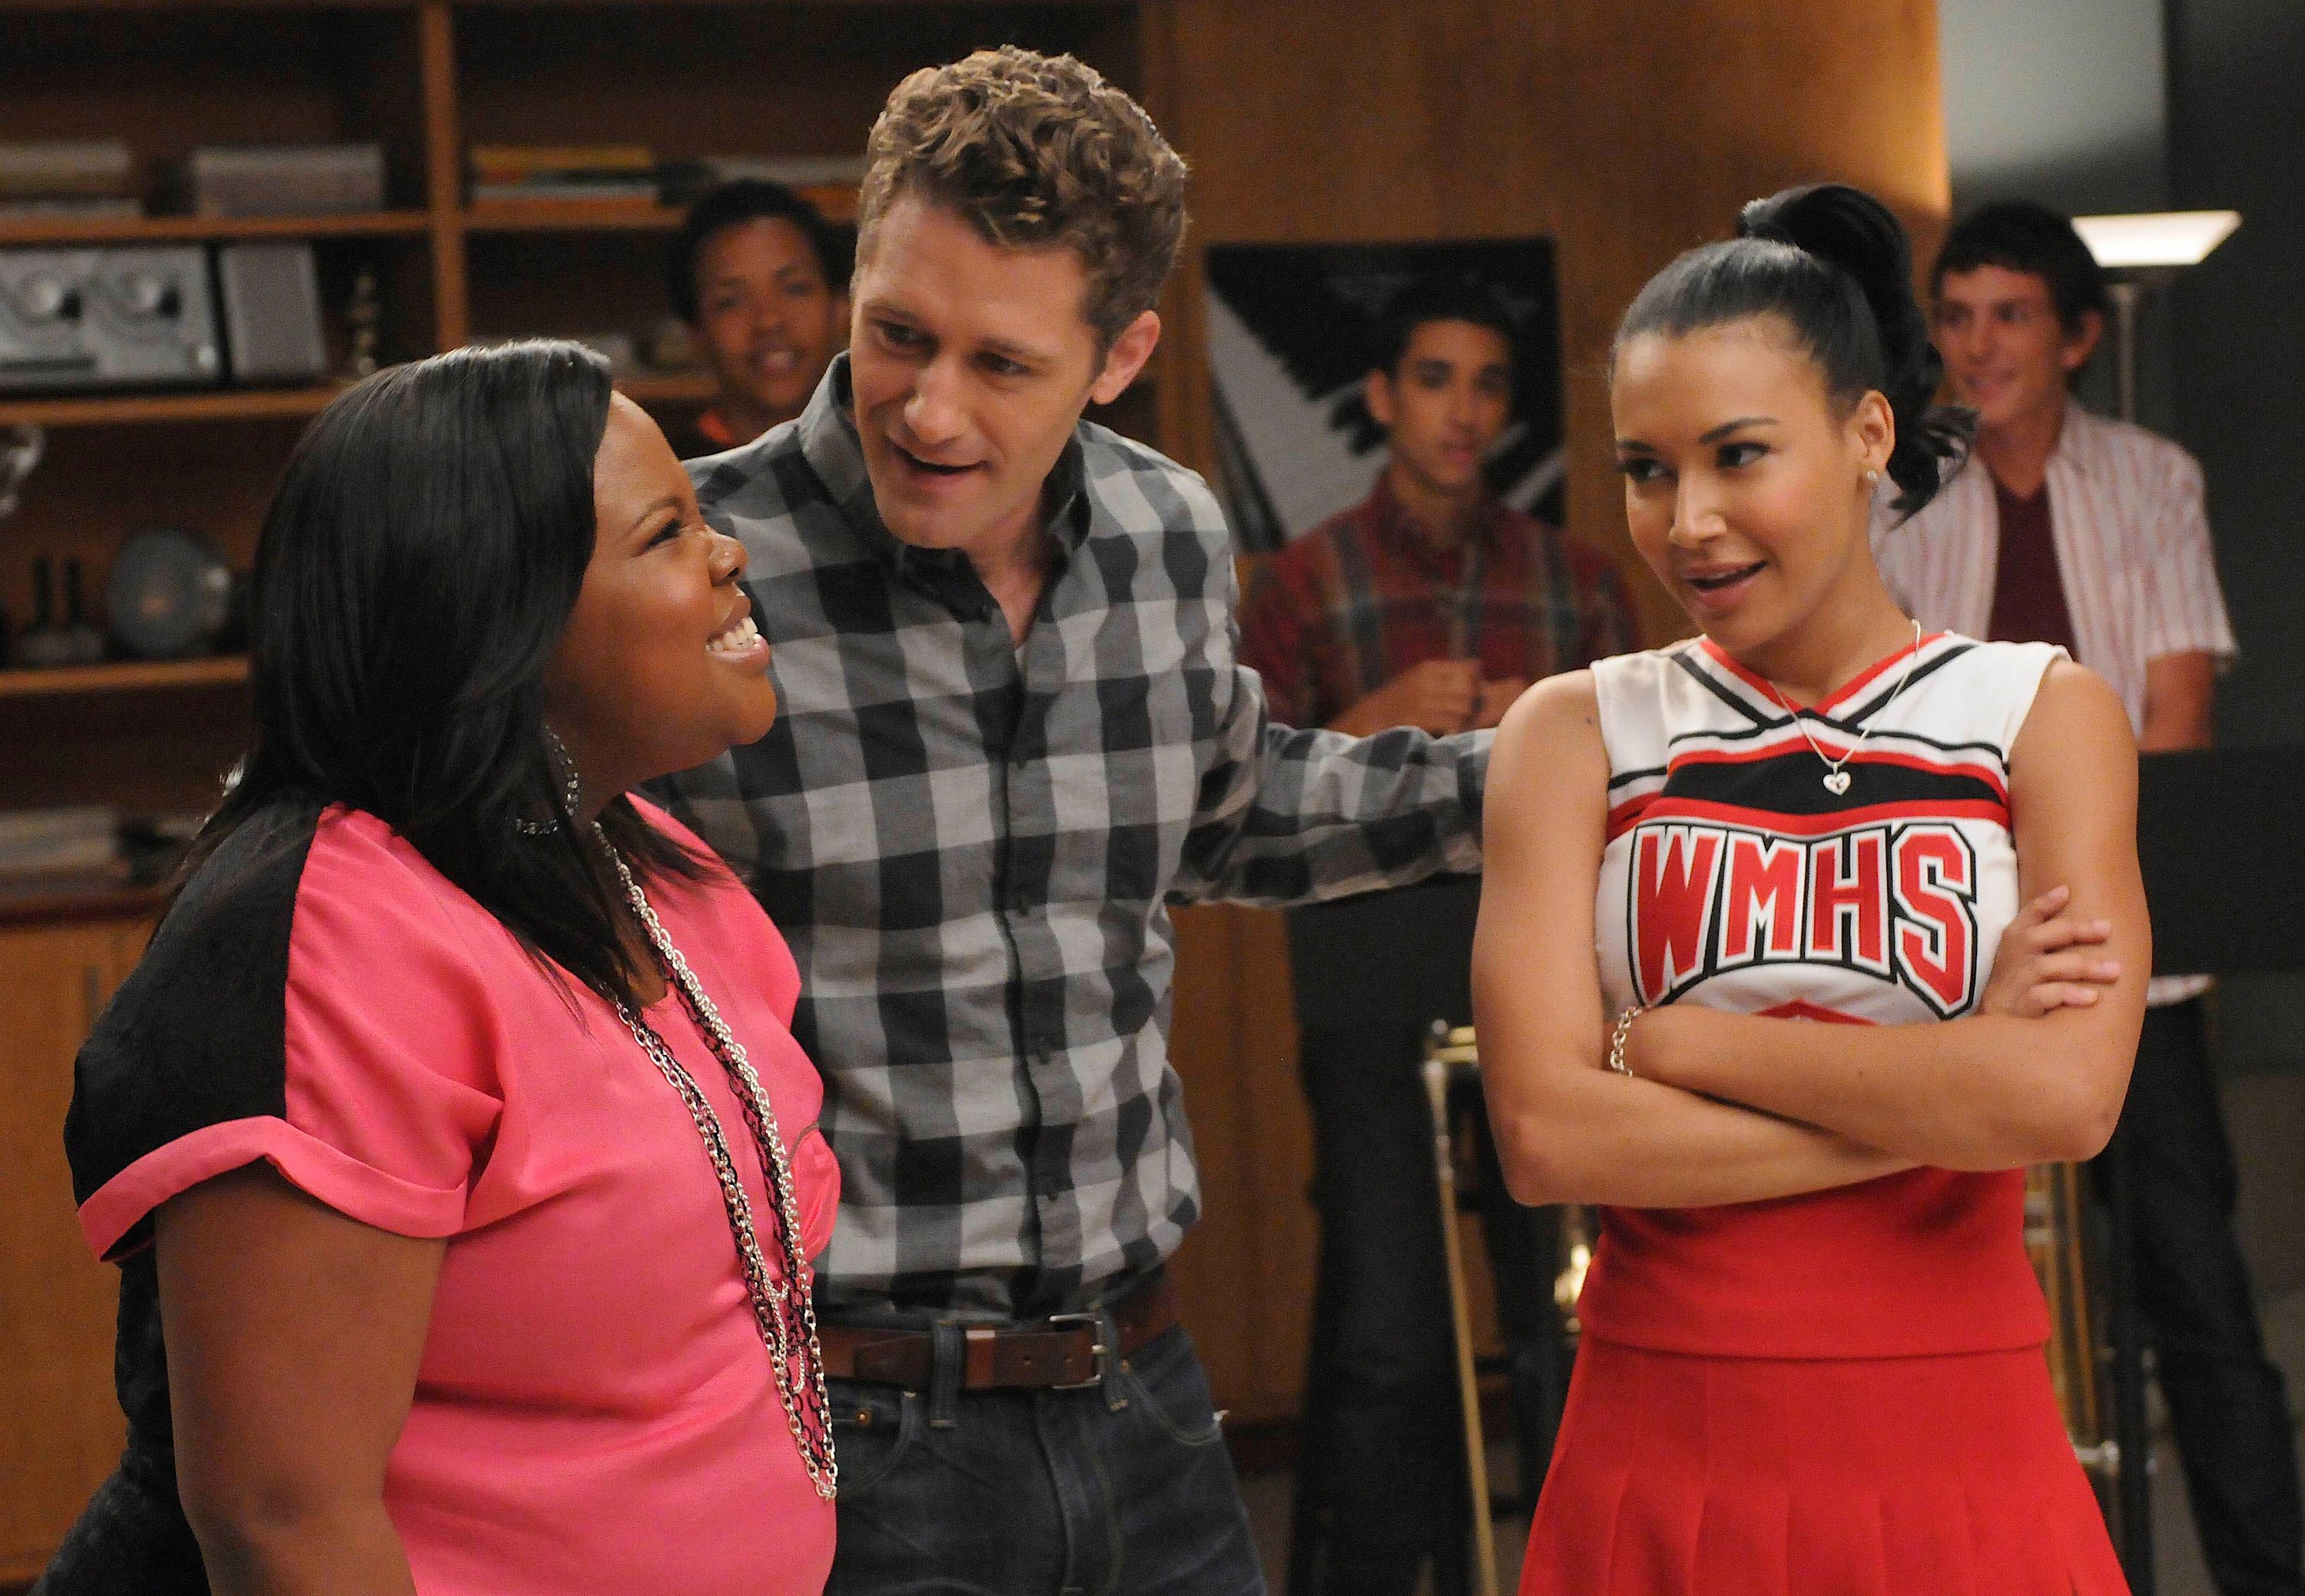 Matthew Morrison, Amber Riley, and Naya Rivera | FOX Image Collection via Getty Images